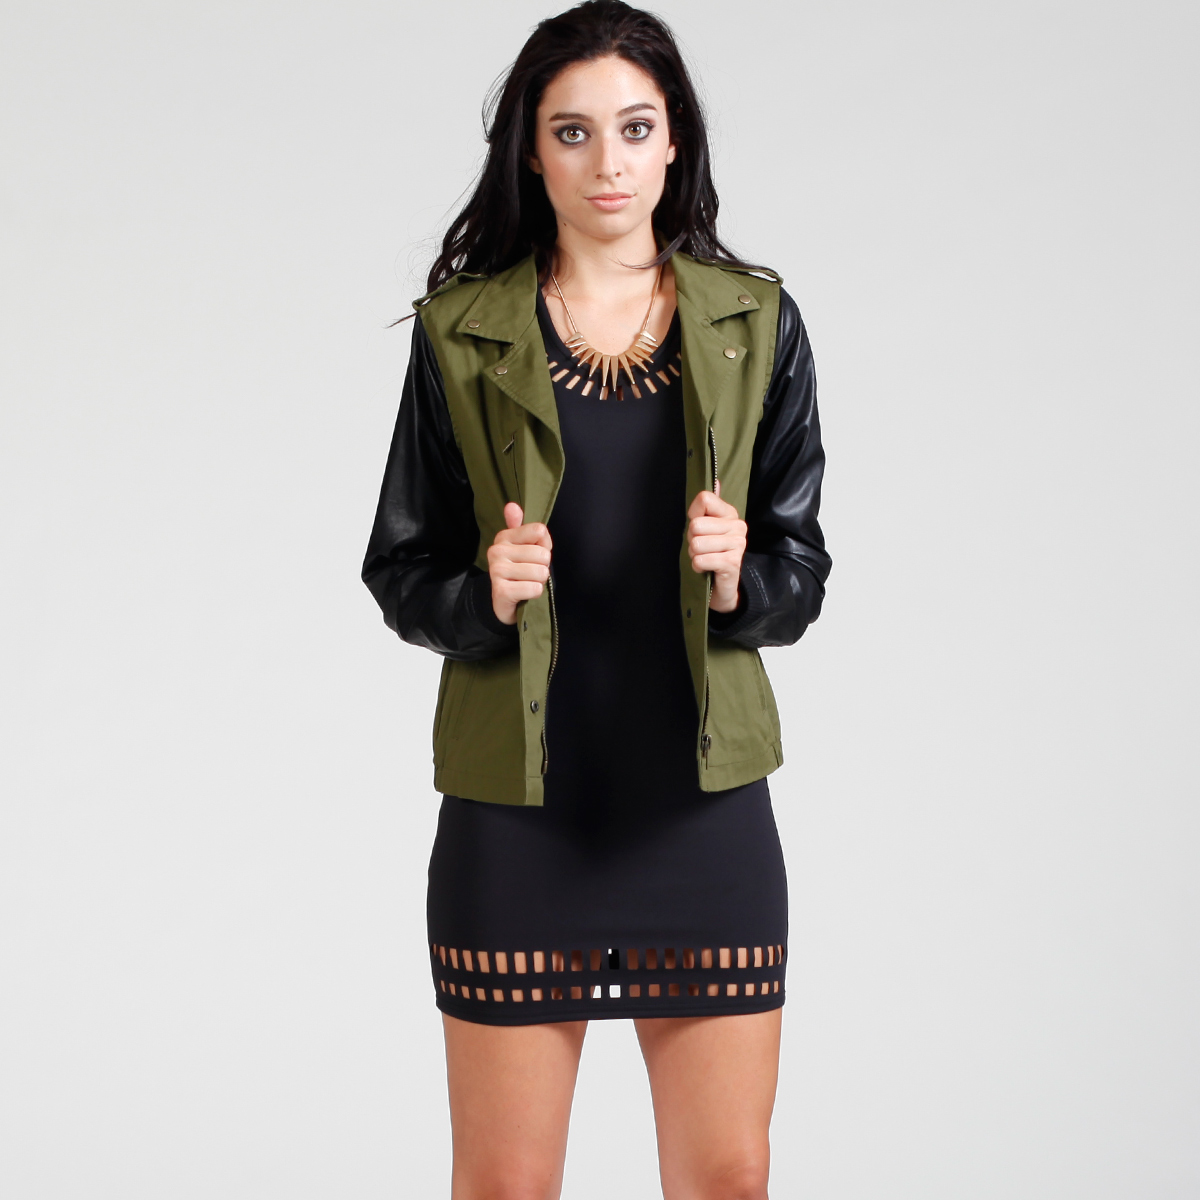 Faux Leather Sleeve Army Jacket in Olive | DAILYLOOK